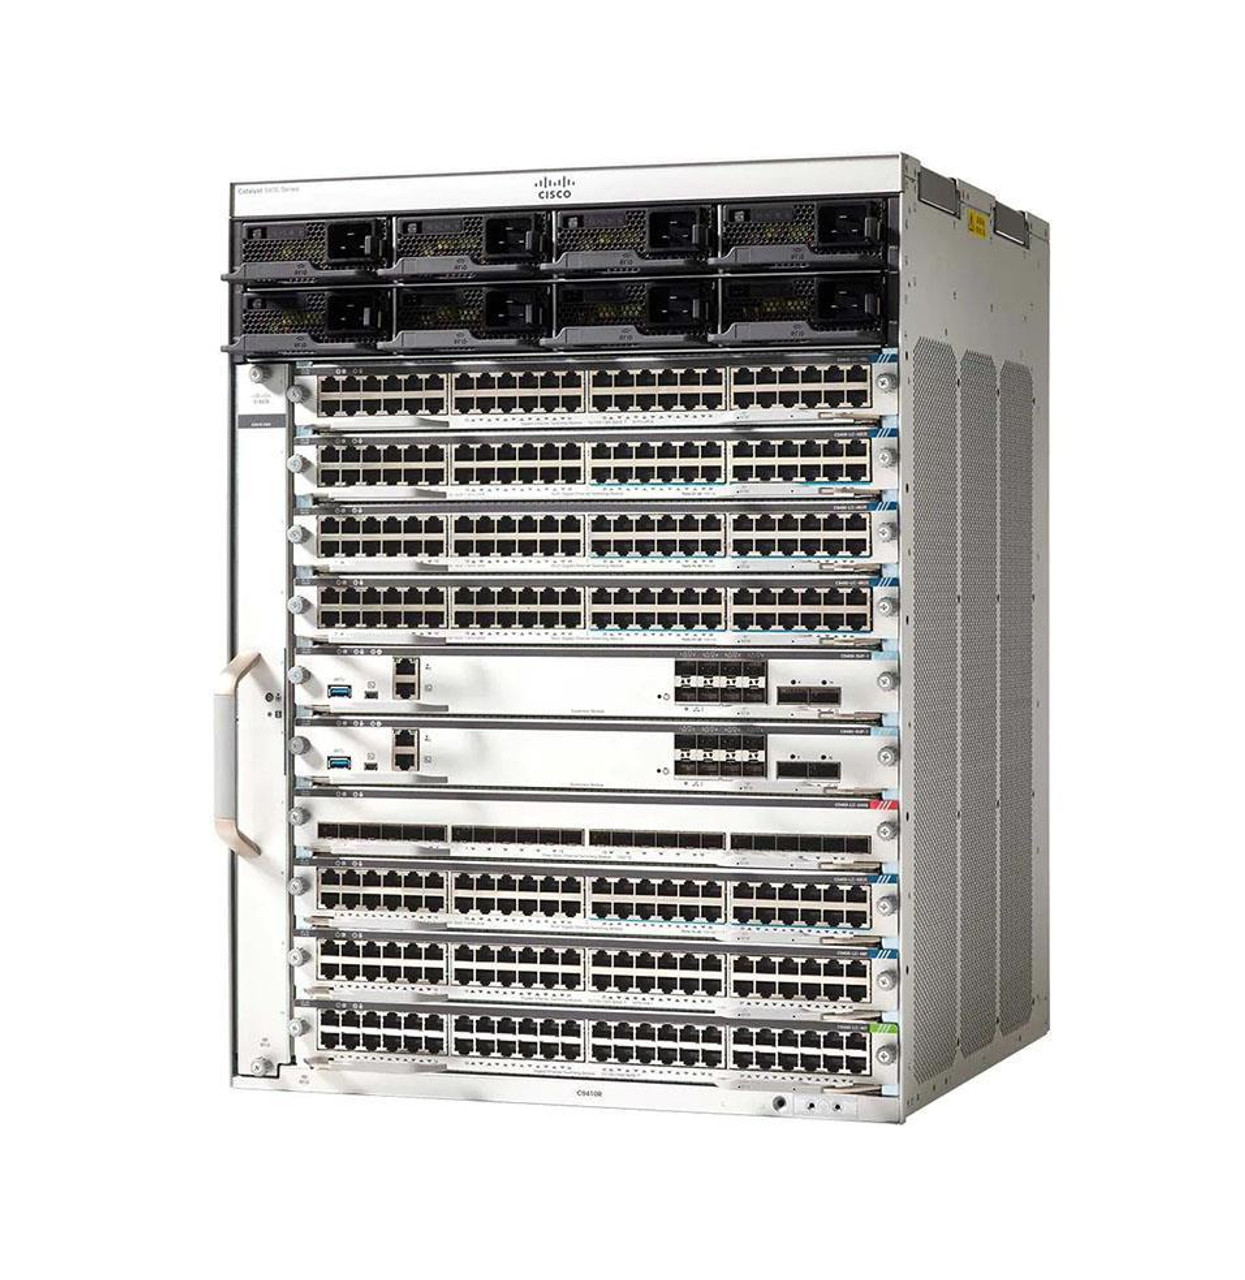 C9410R= Cisco Catalyst 9400 Series 10 slot Chassis (Refurbished)